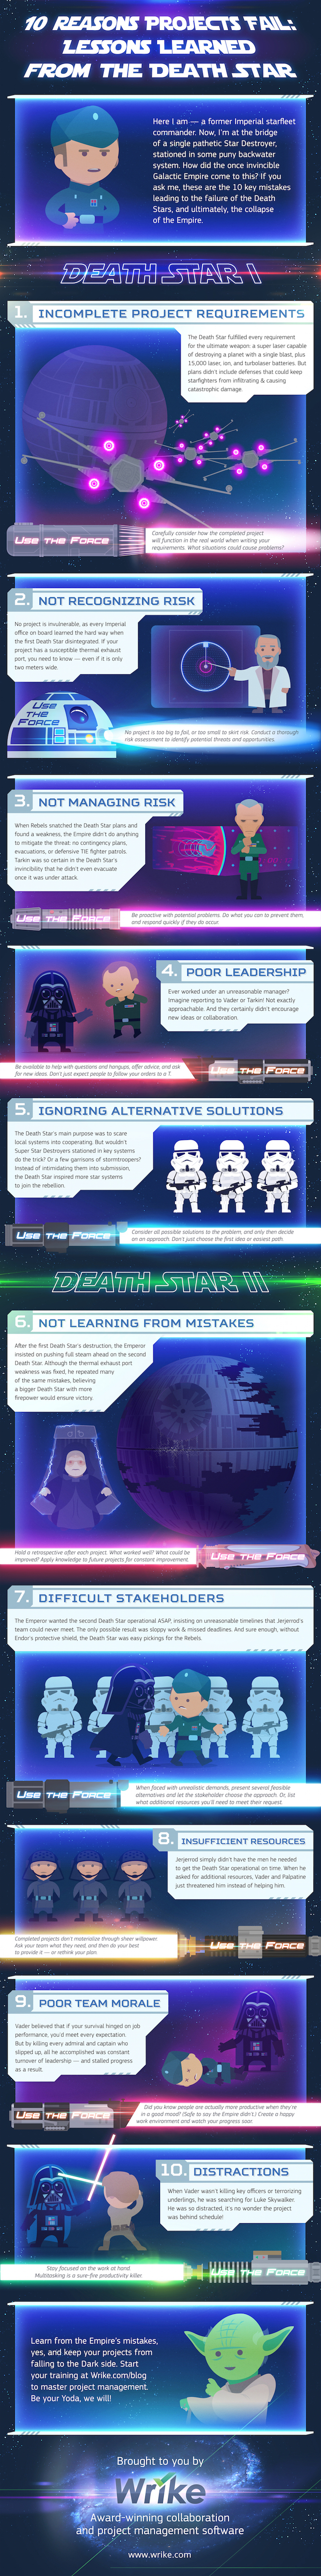 10 Reasons the Death Star Failed #infographic